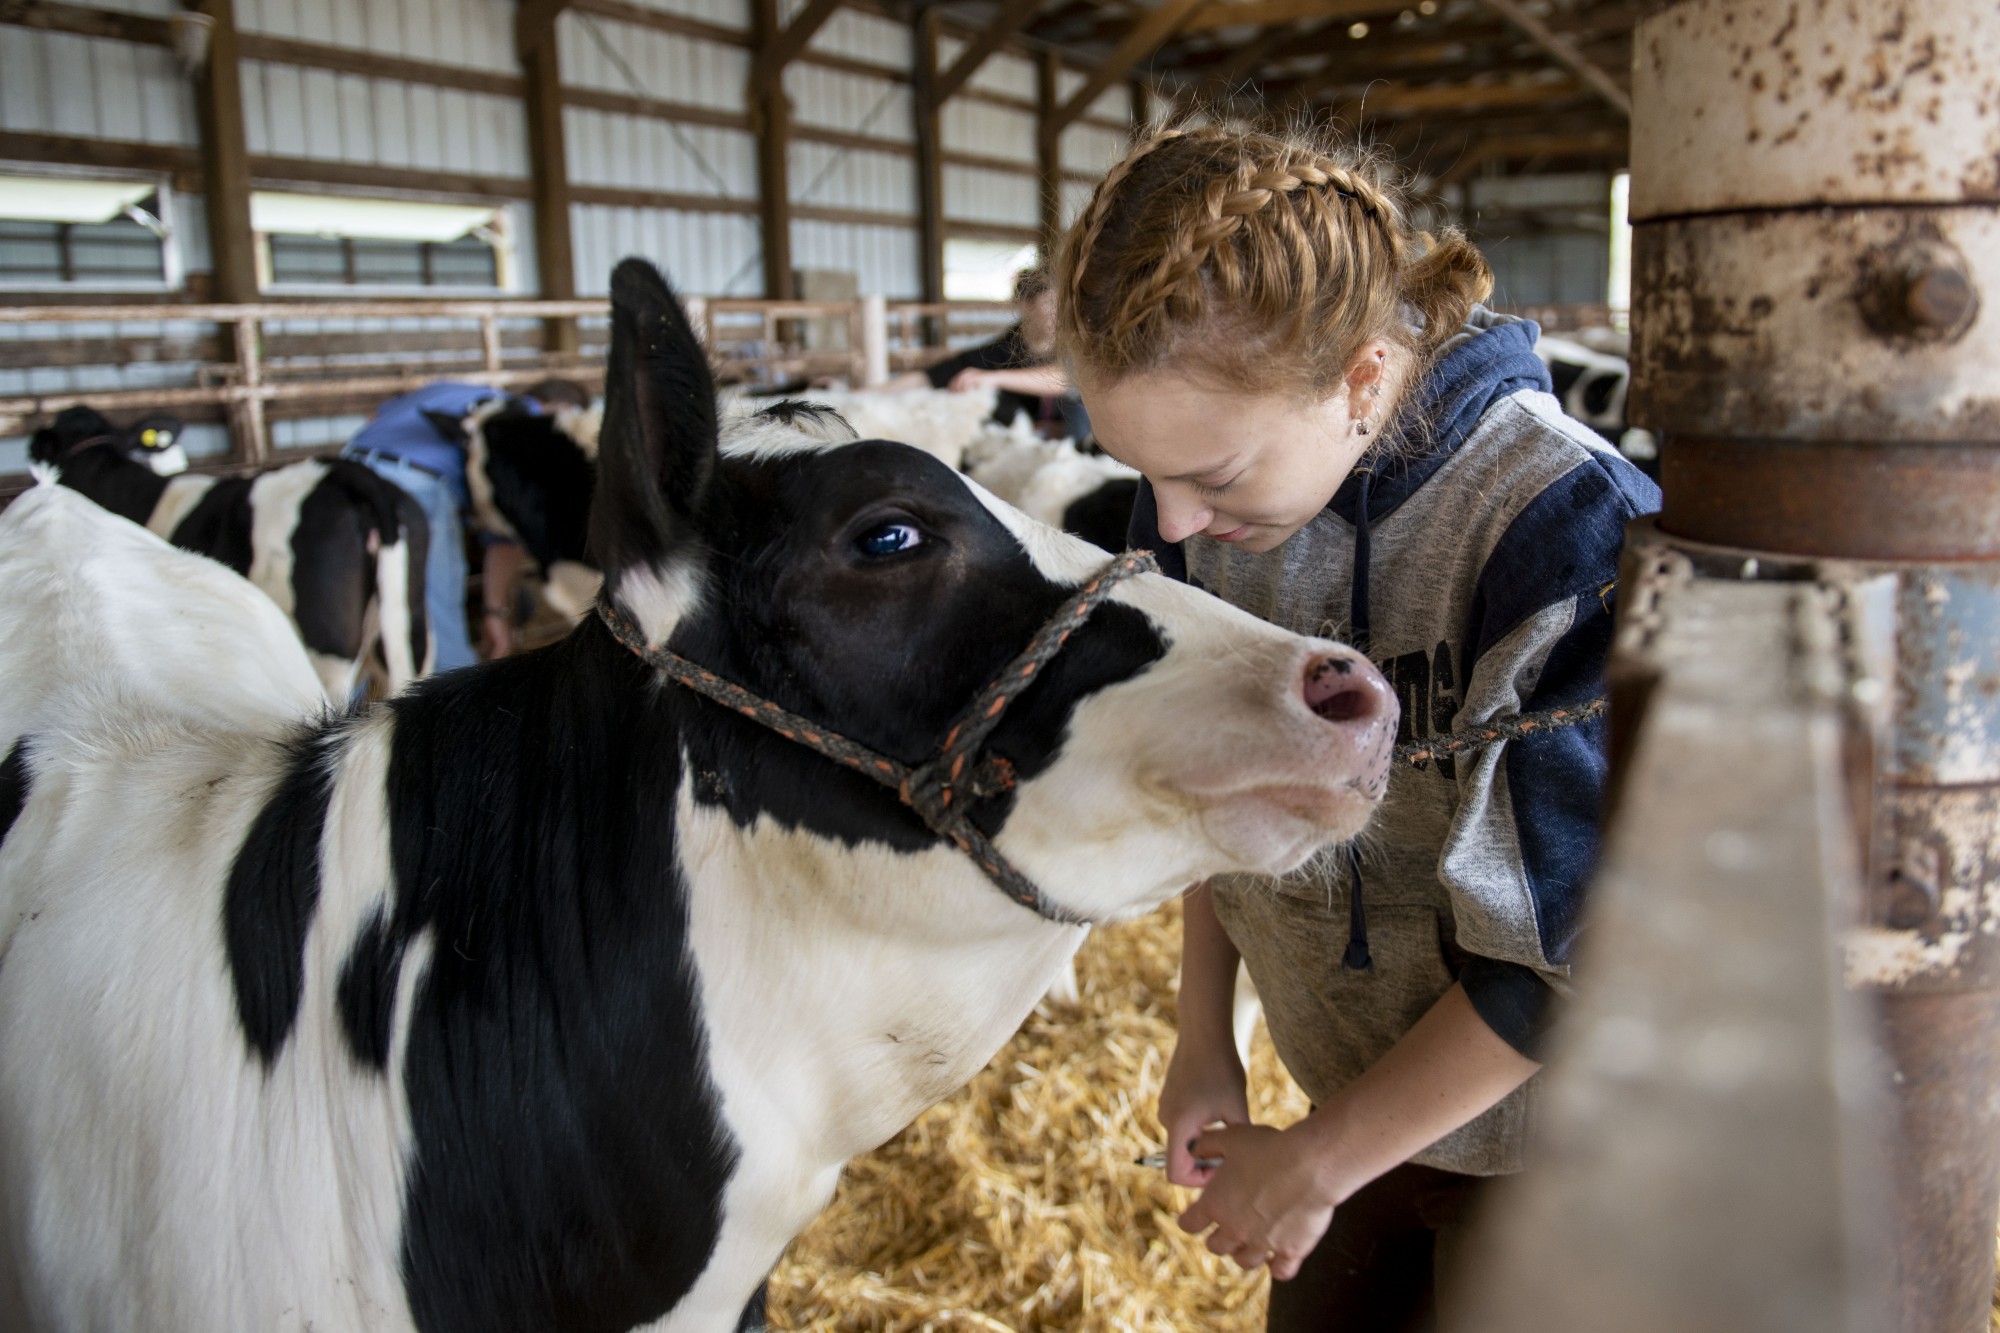 1:17 p.m.
Senior Emily Jacobson tends to cows in the Cattle Barn on the St. Paul campus. 